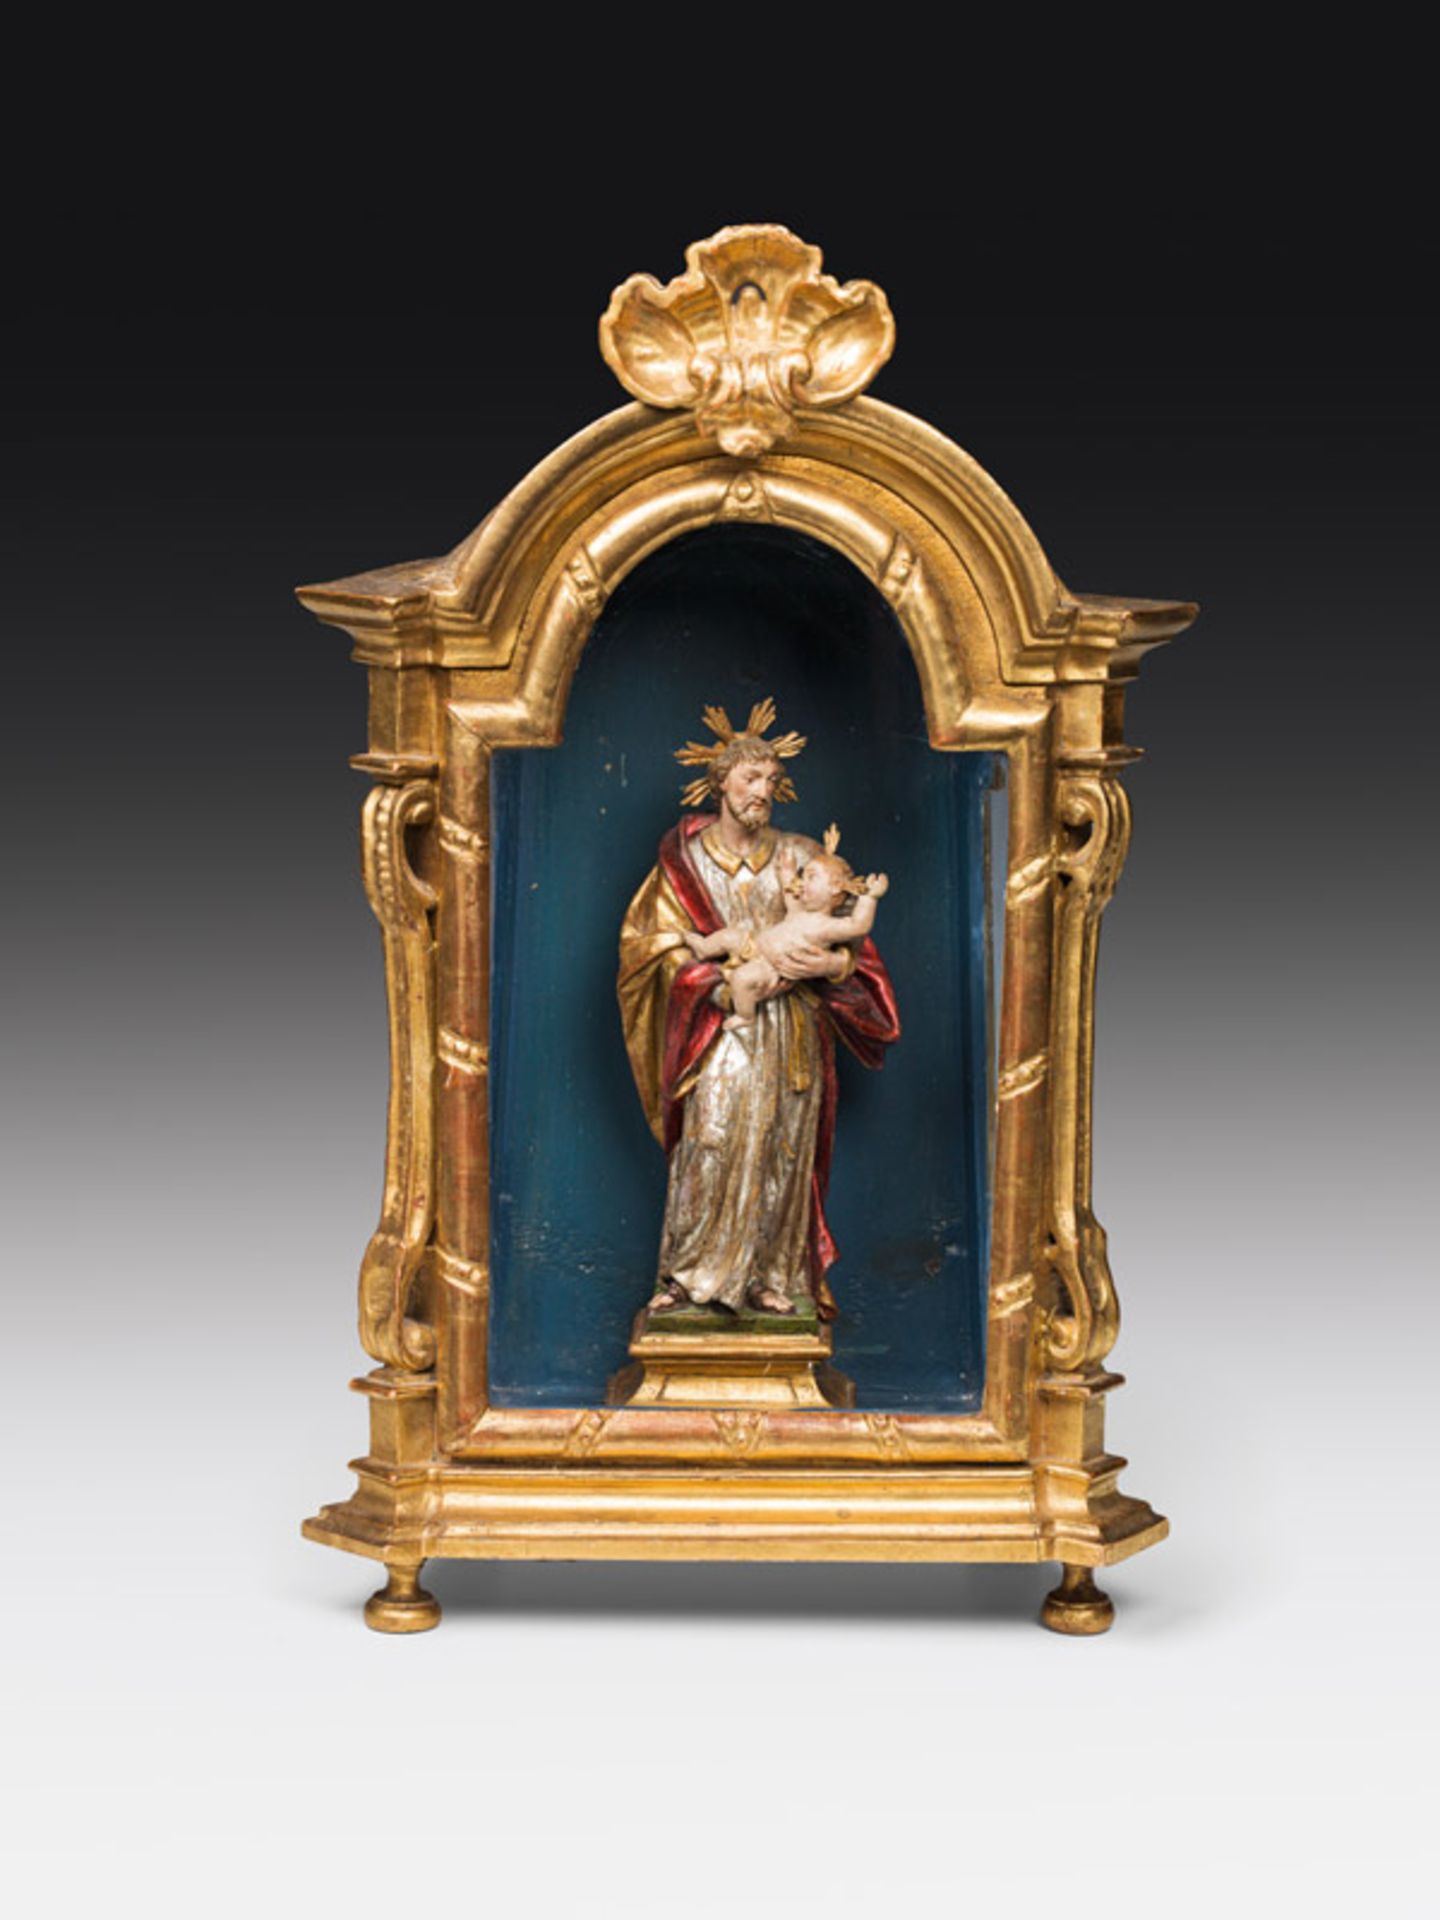 St. Joseph with Christ Child in shrine, South Germany, 2nd half of the 18th century